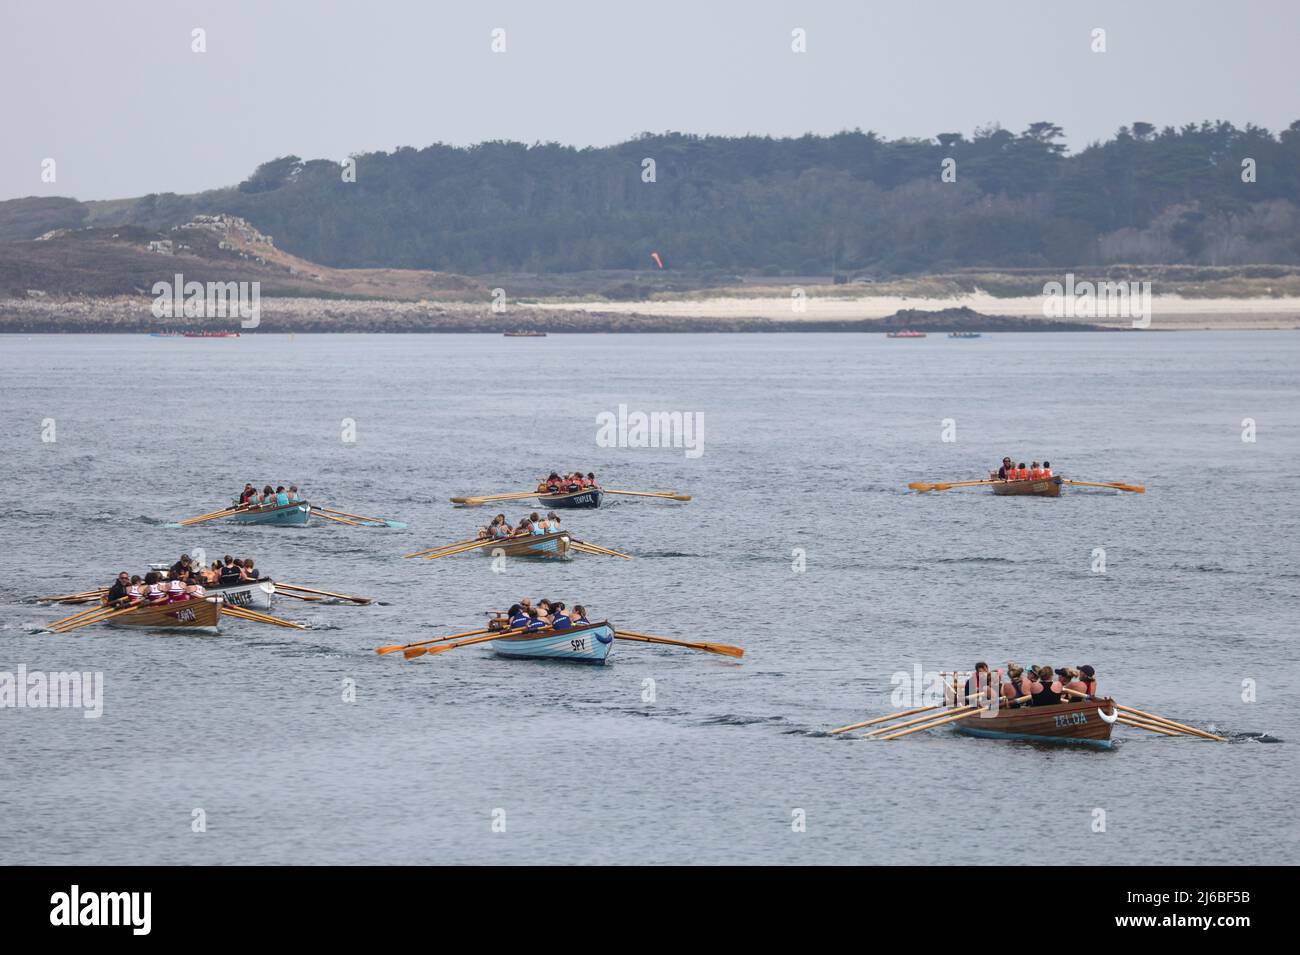 People take part in the annual World Pilot Gig rowing Championships, at St.Mary's on the Isles of Scilly, Britain April 30, 2022. REUTERS/Tom Nicholson Stock Photo